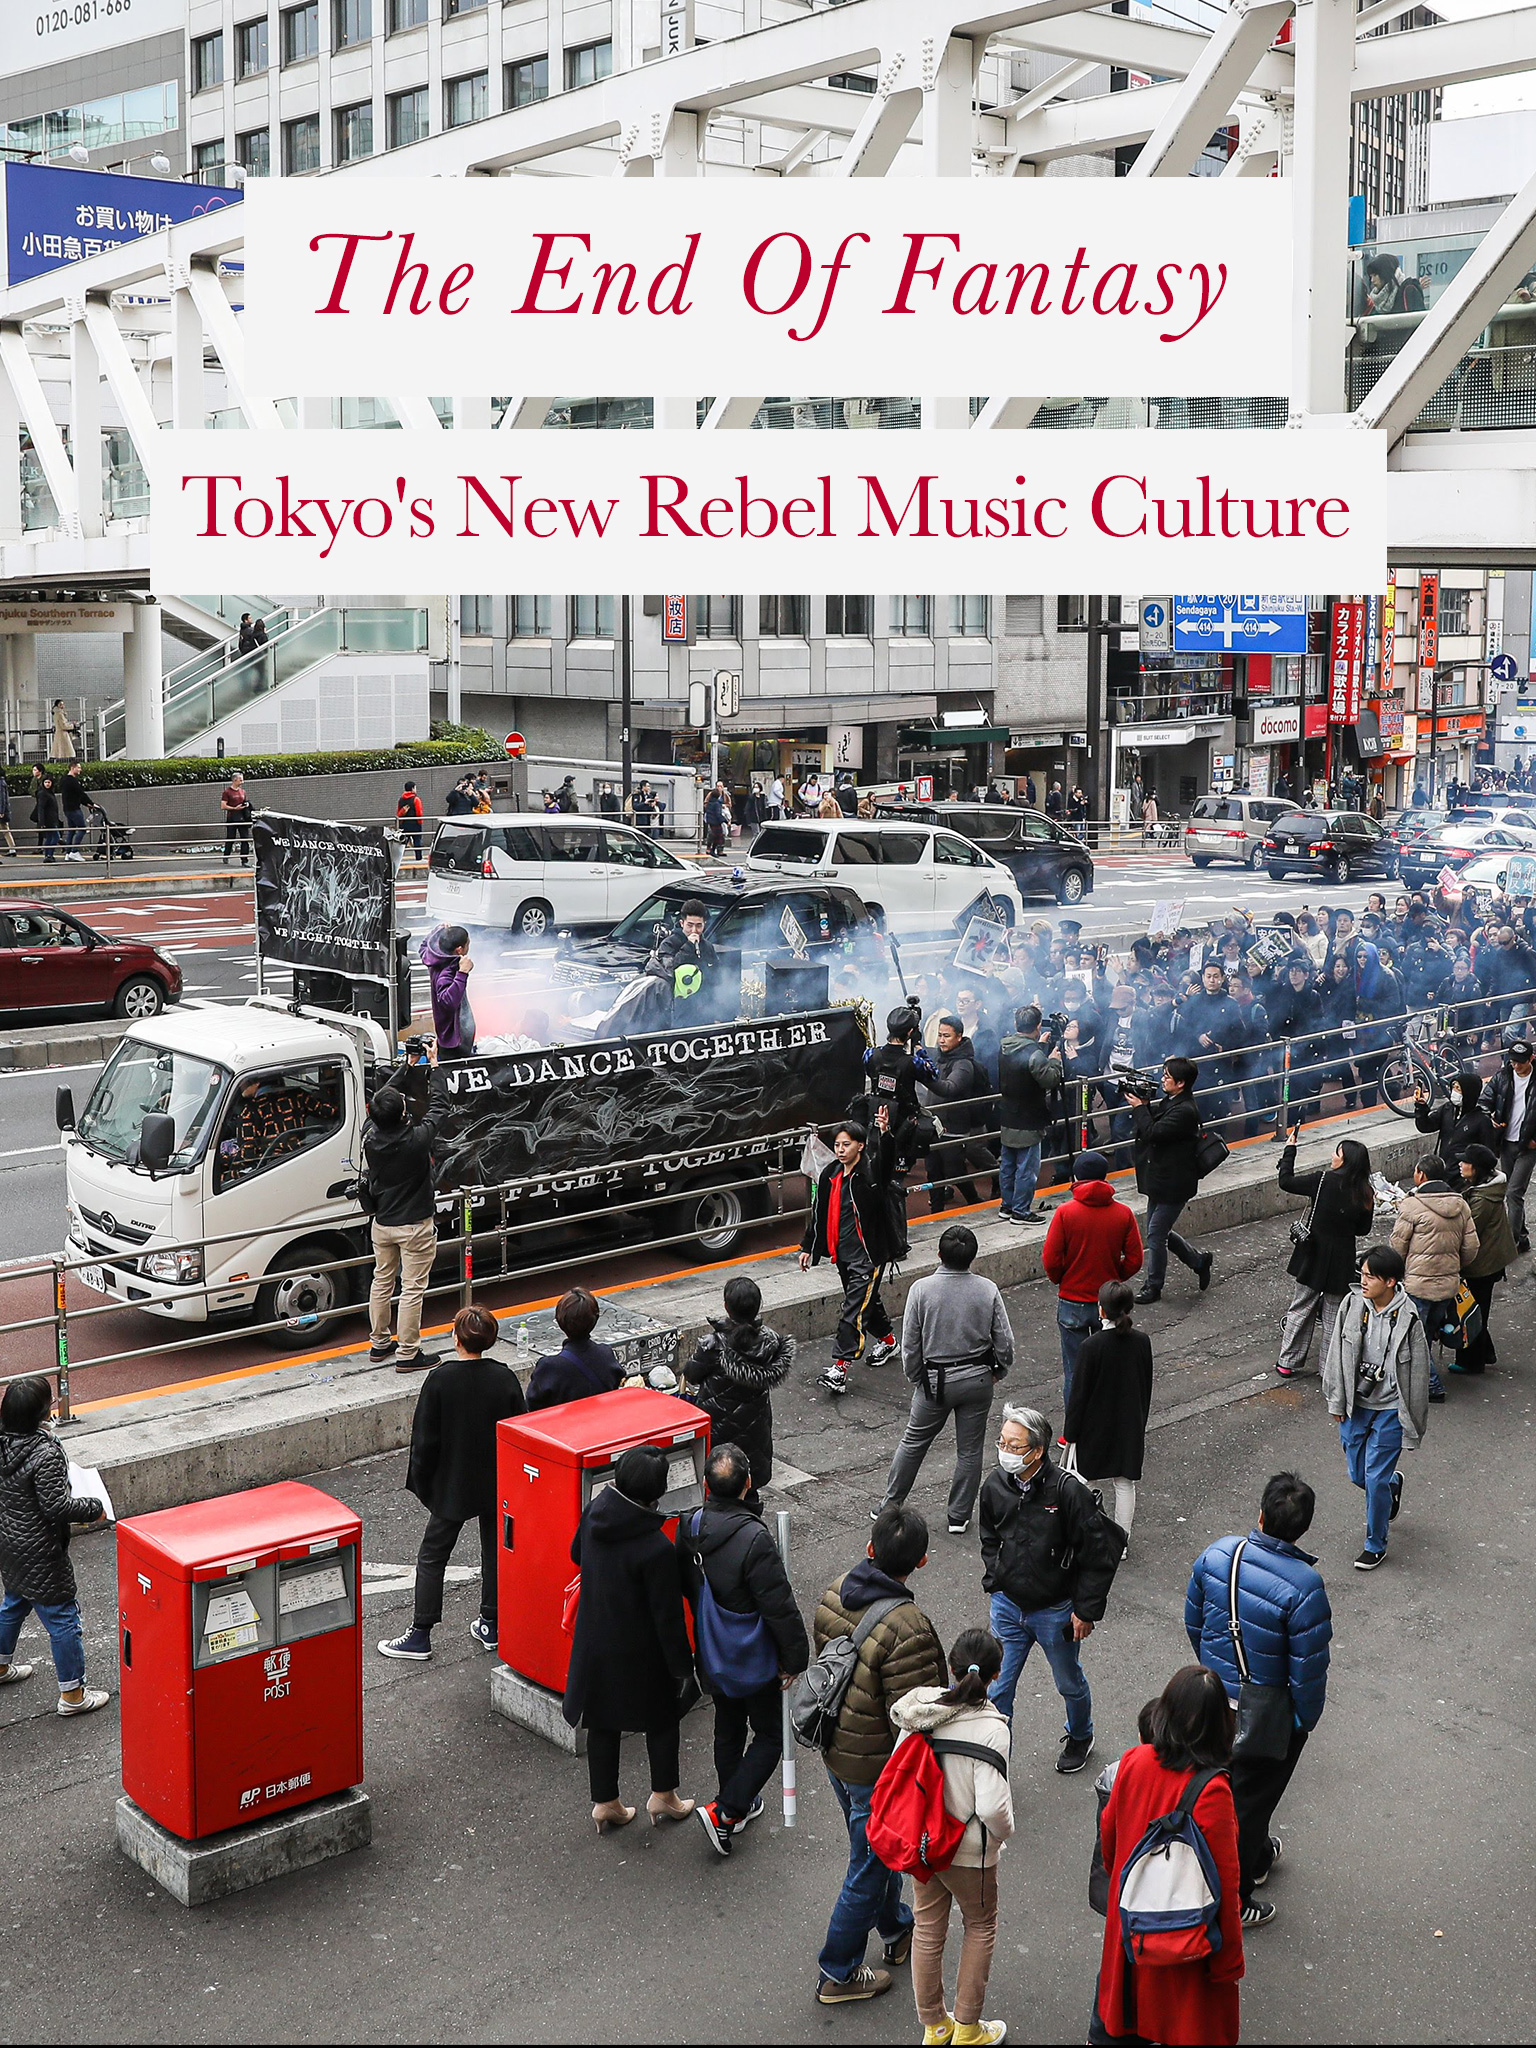 The End Of Fantasy: Tokyo's New Rebel Music Culture